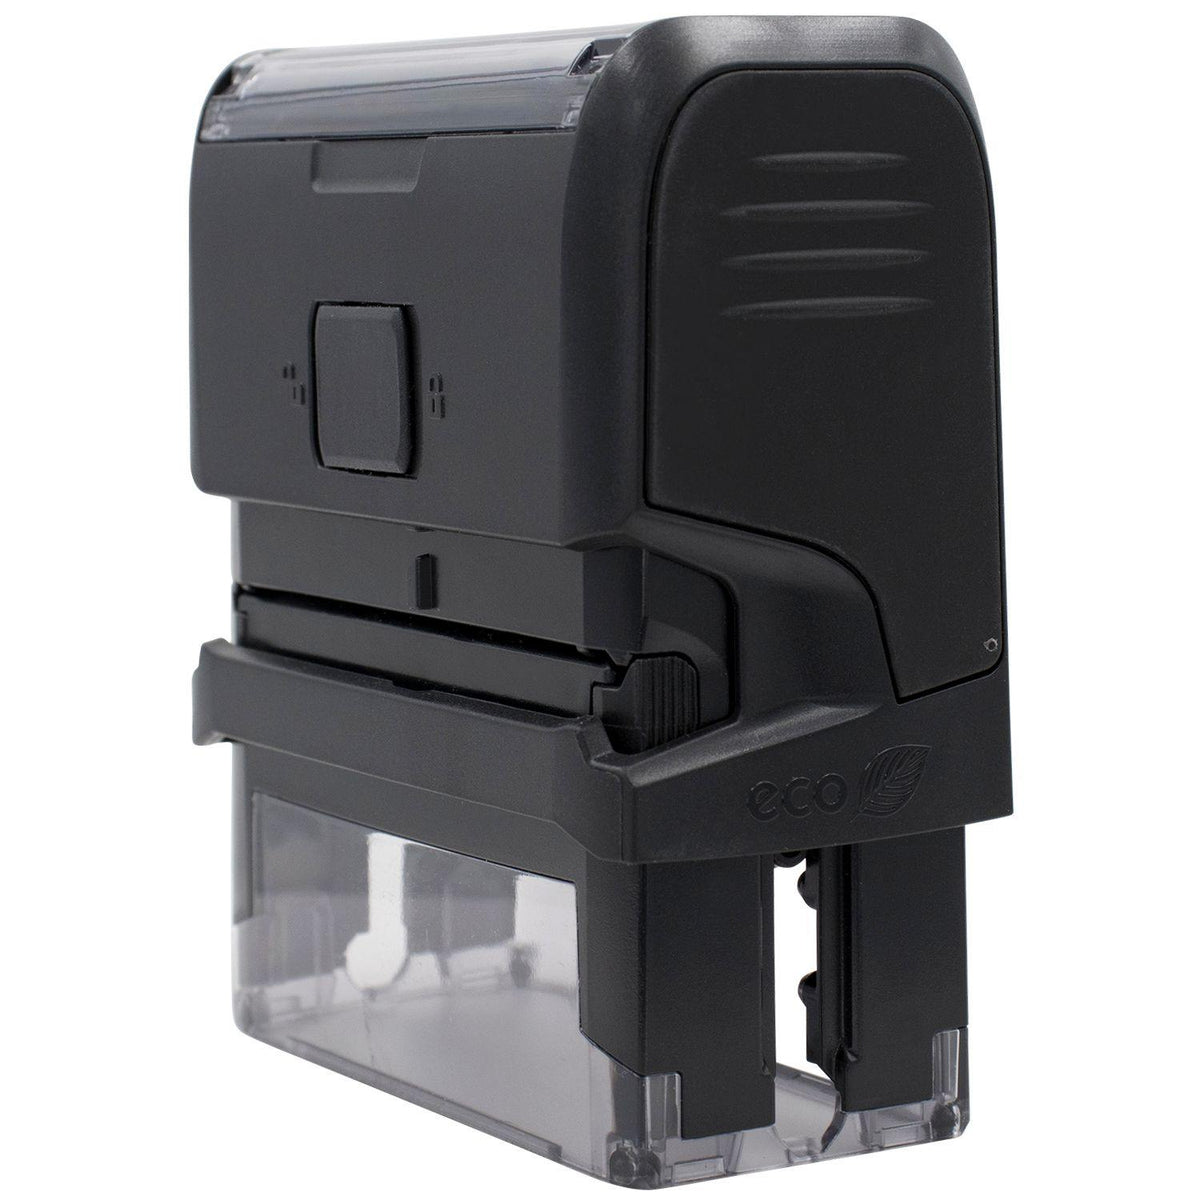 Large Self-Inking Outline Font Copy Stamp - Engineer Seal Stamps - Brand_Trodat, Impression Size_Large, Stamp Type_Self-Inking Stamp, Type of Use_General, Type of Use_Office